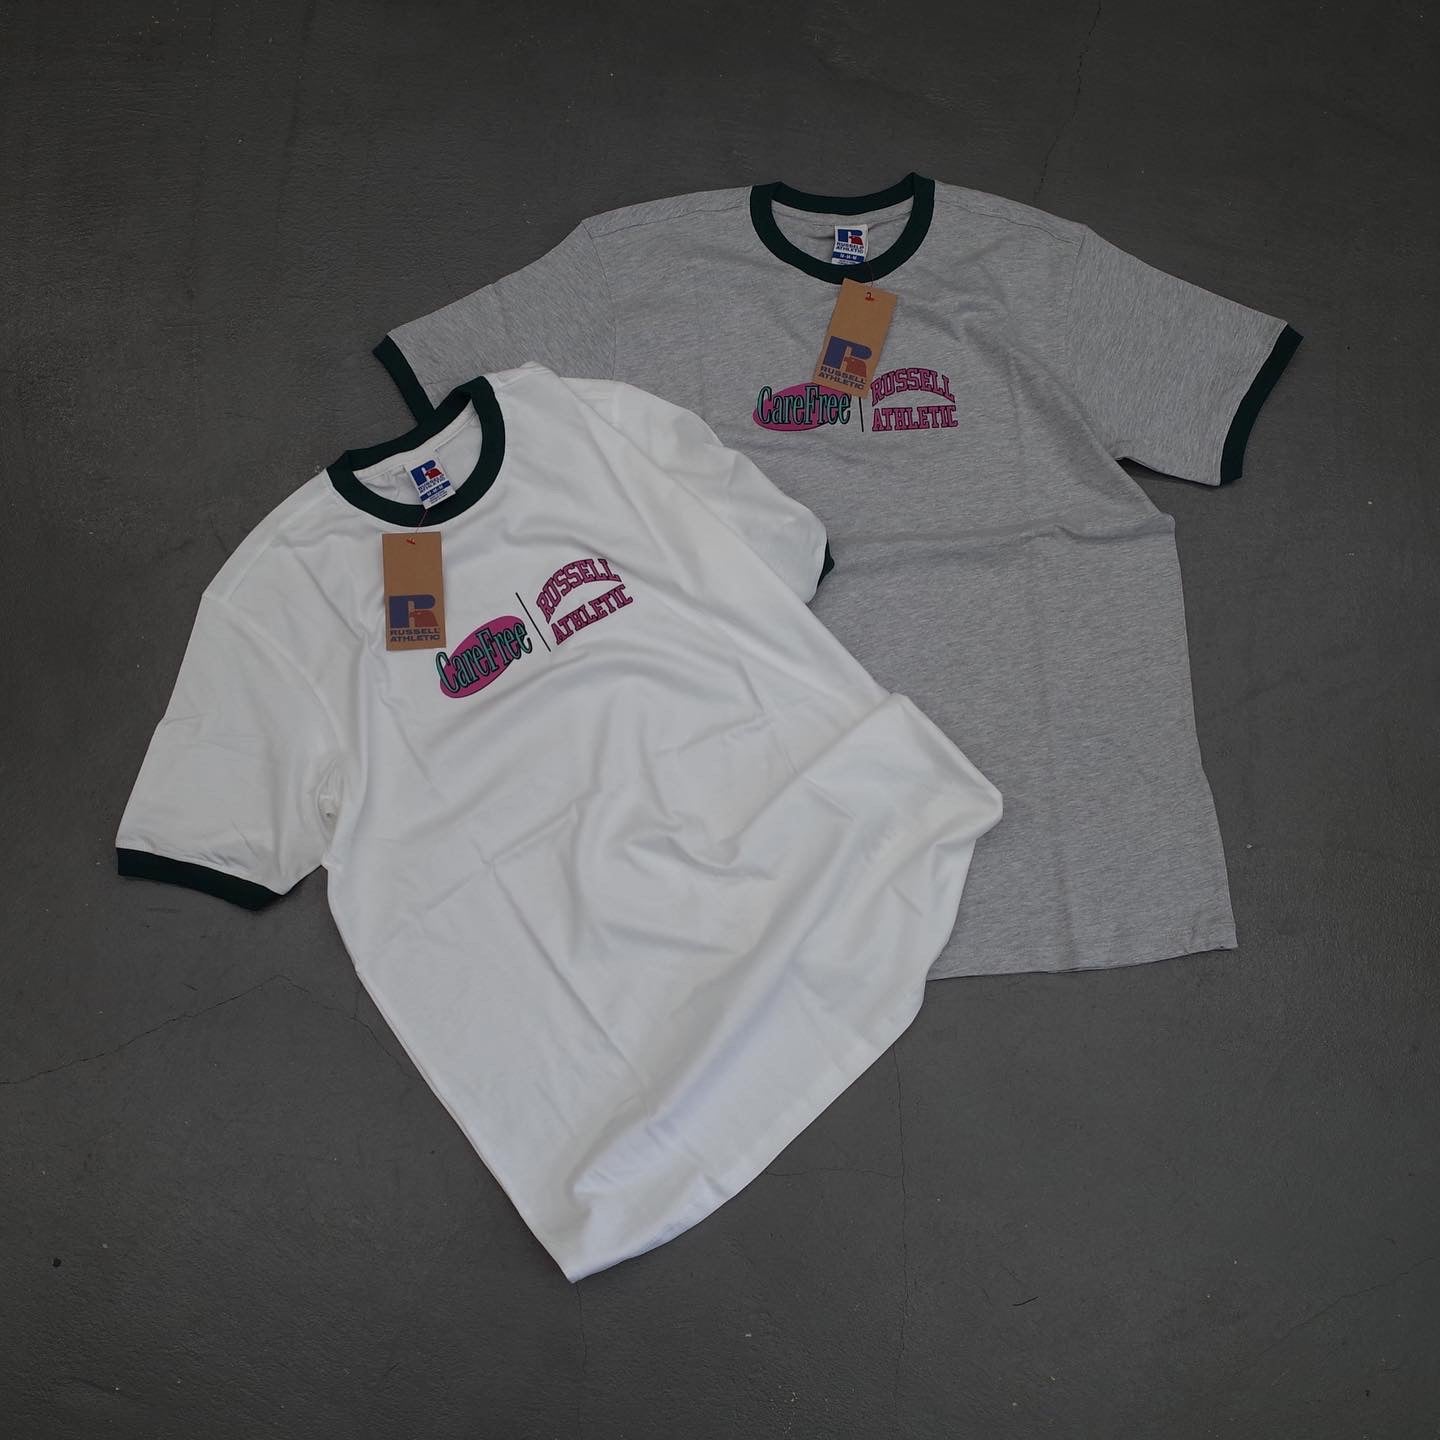 CareFree x Russell Athletic S/S Tee